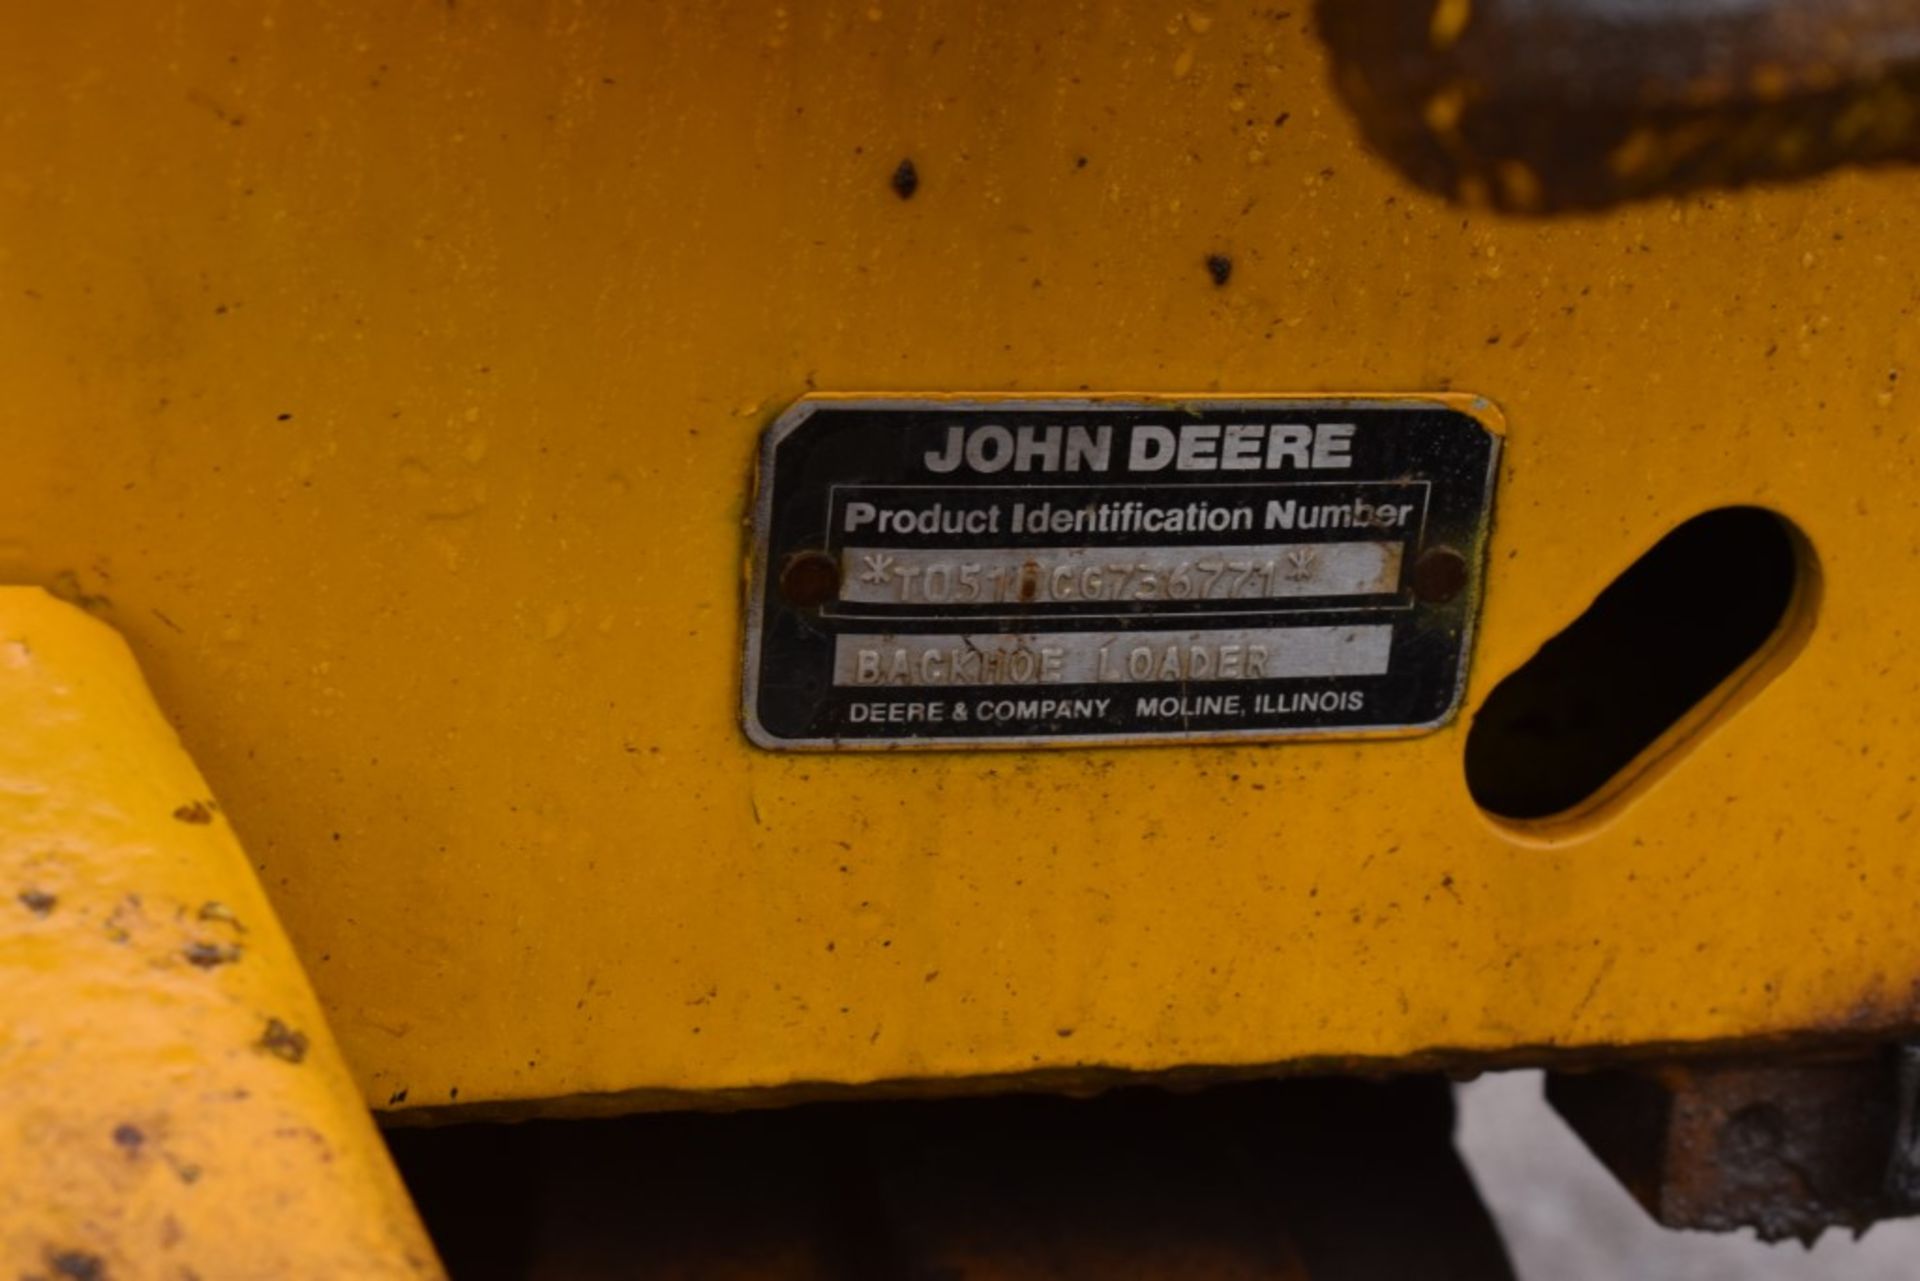 John Deere 510C Turbo Backhoe 5856 Hours, Runs and Operates, 4WD, 92" Bucket, Extendable Hoe, 24" - Image 33 of 33